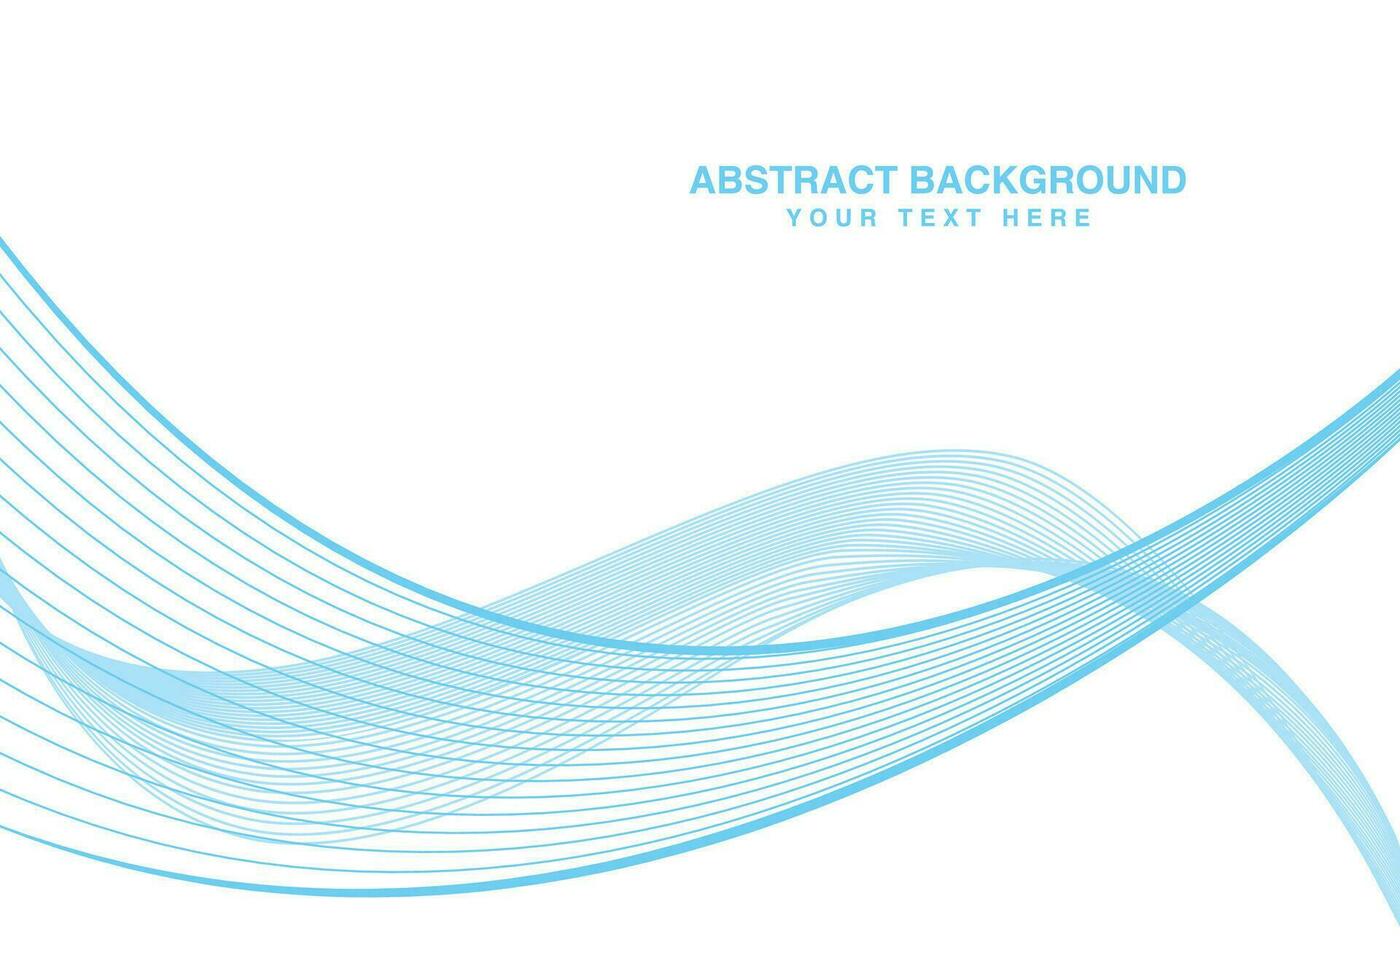 Abstract blue Background creative design free vector illustration, colorful wave design.